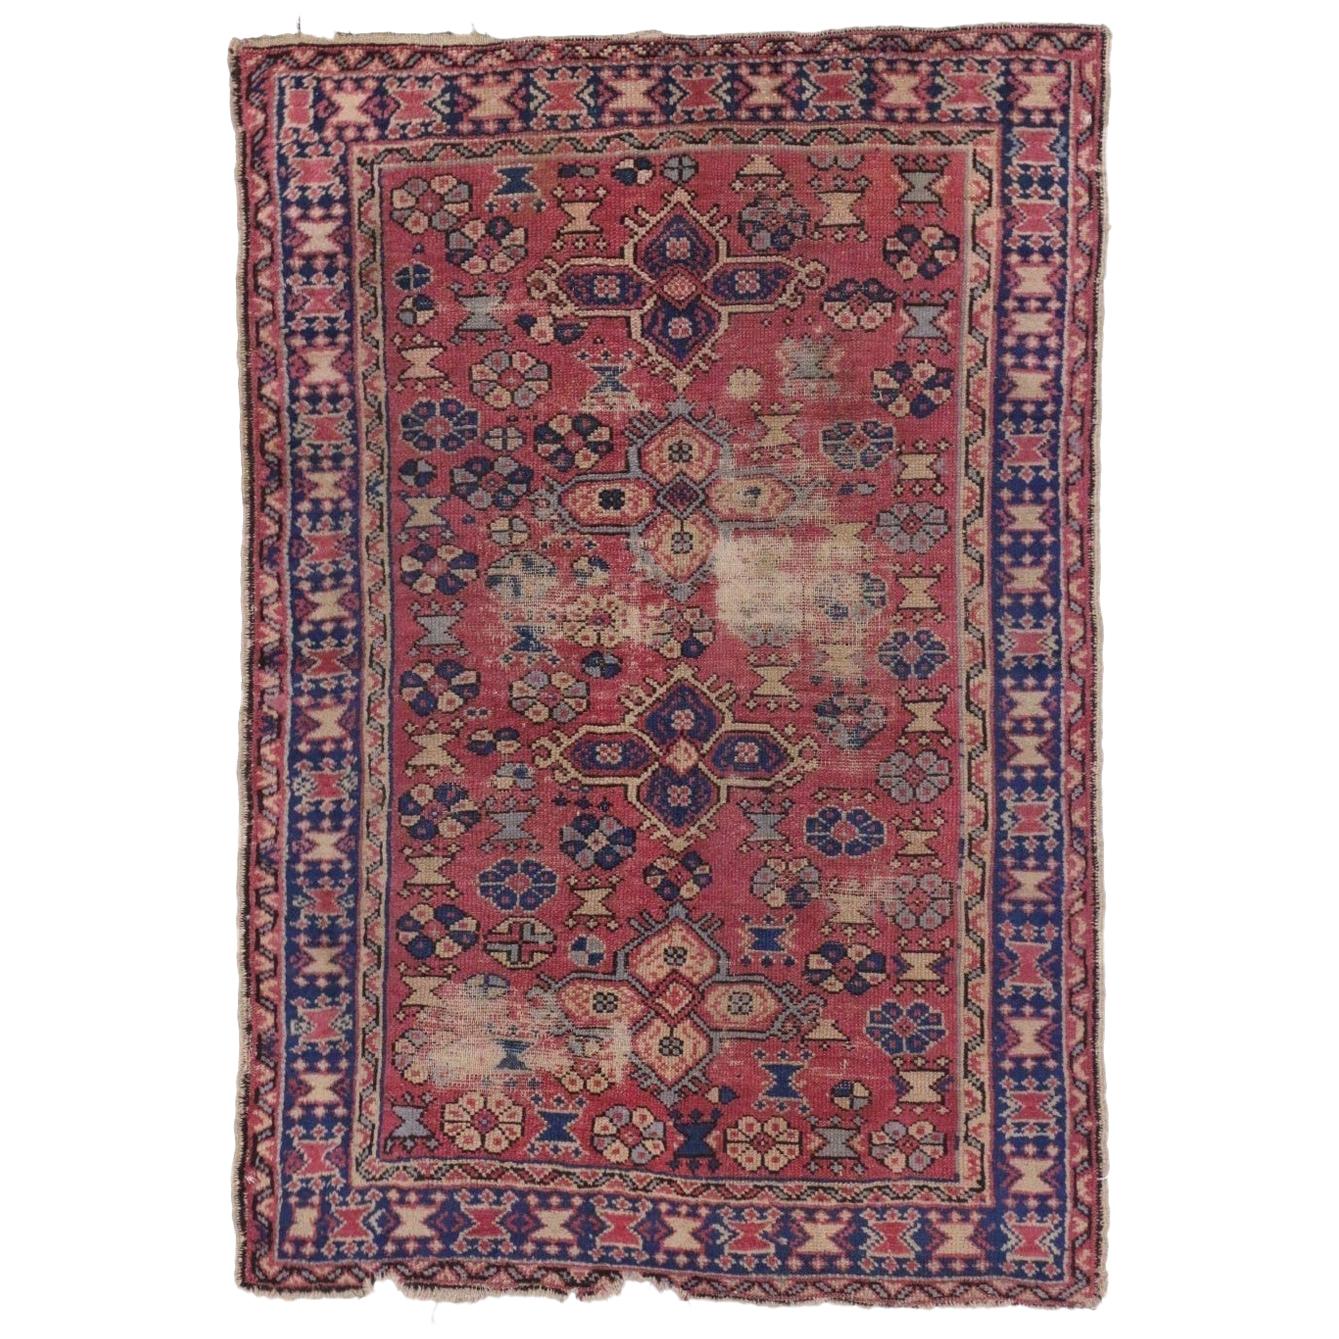 Distressed Antique Turkish Sparta Rug with Industrial Rustic Artisan Style